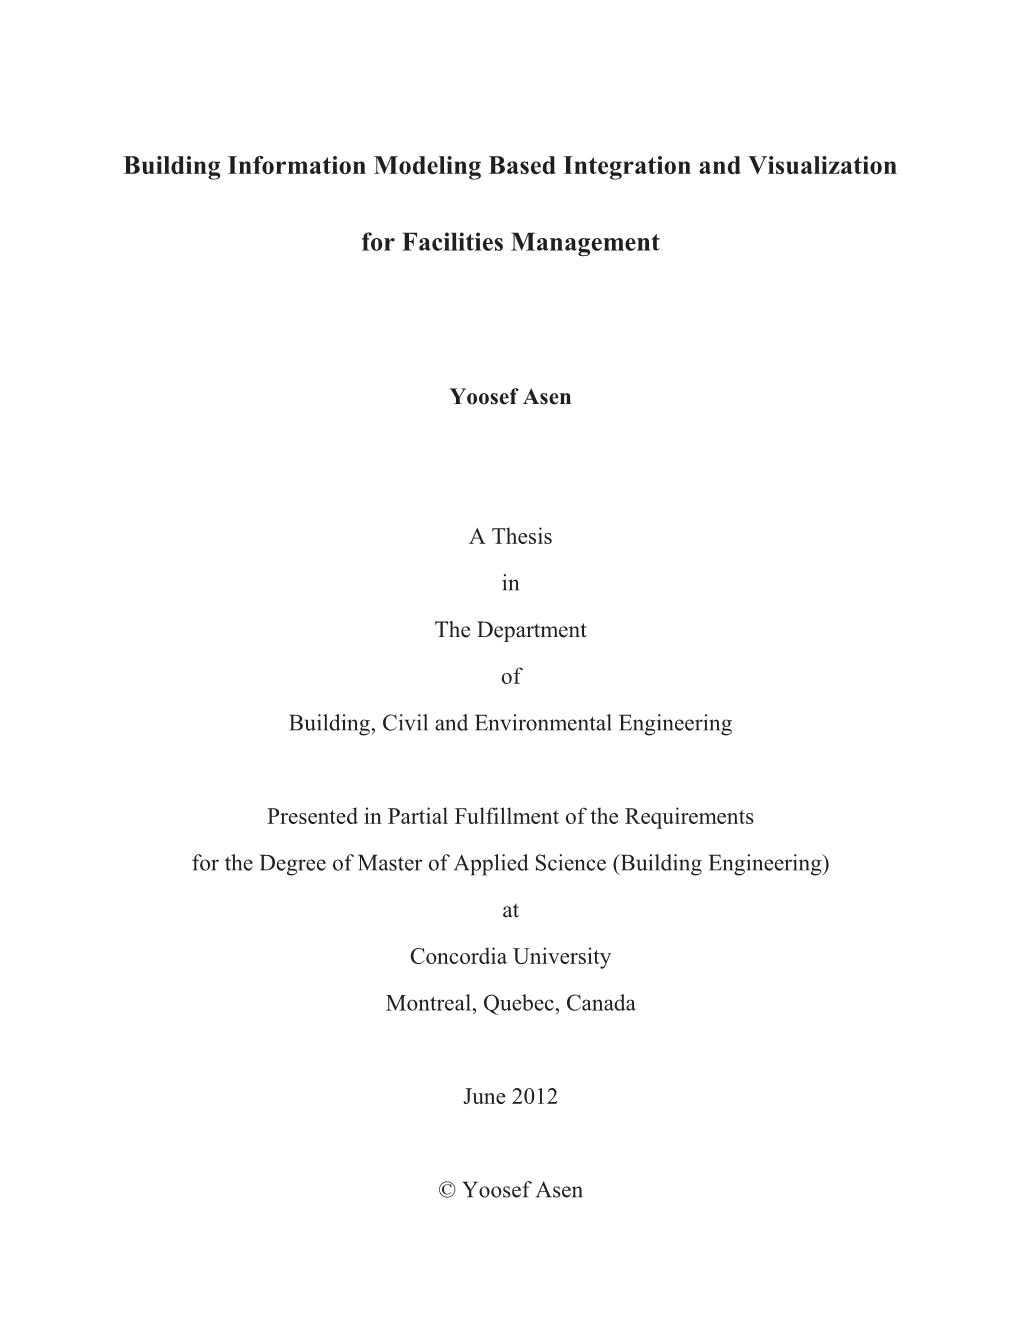 Building Information Modeling Based Integration and Visualization for Facilities Management and Submitted in Partial Fulfillment of the Requirement for the Degree Of